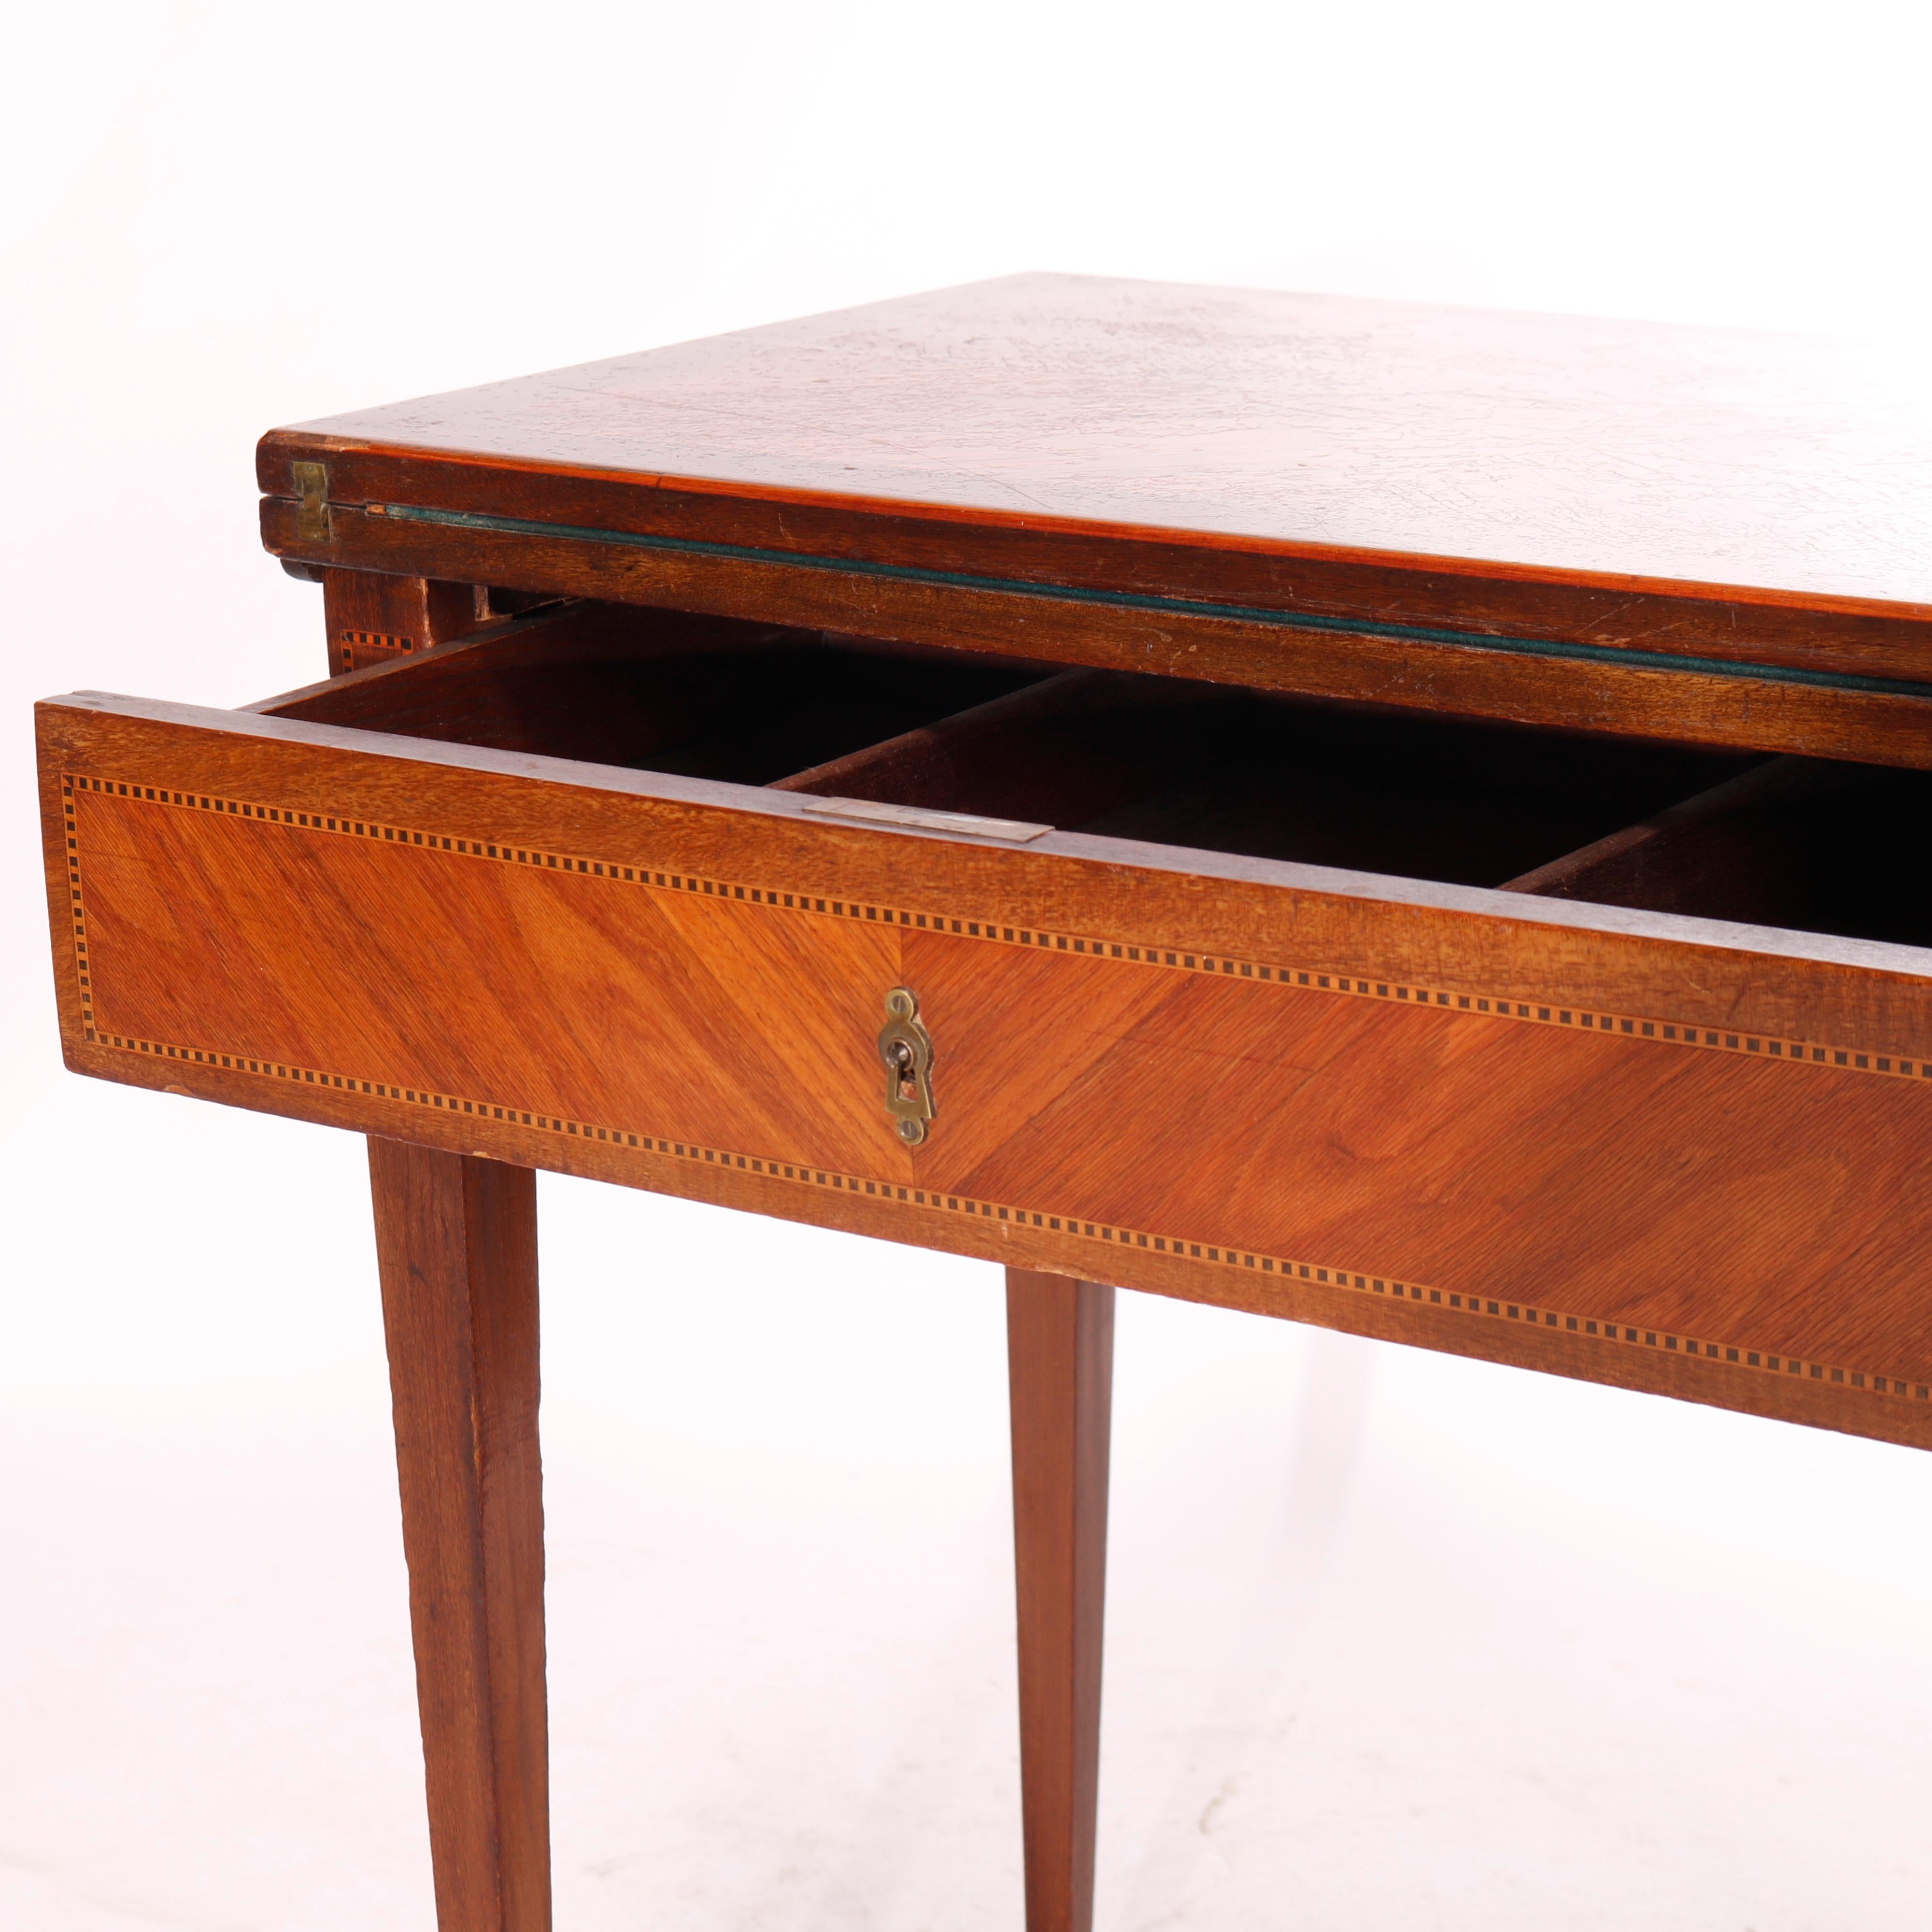 19th Century Antique Louis XV Kingwood & Rosewood Inlaid & Banded Flip-Top Game Table 19th C